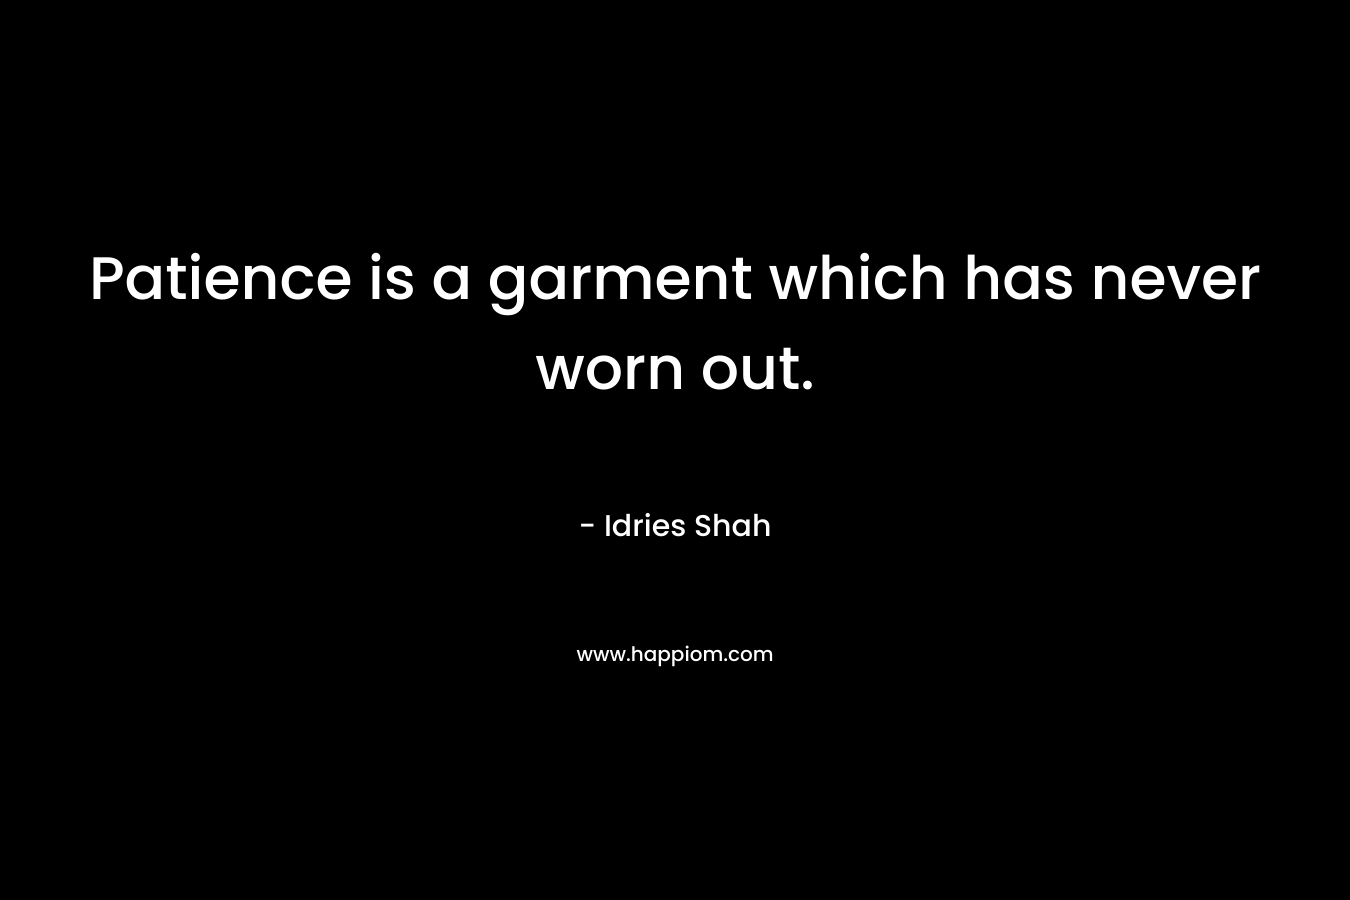 Patience is a garment which has never worn out.